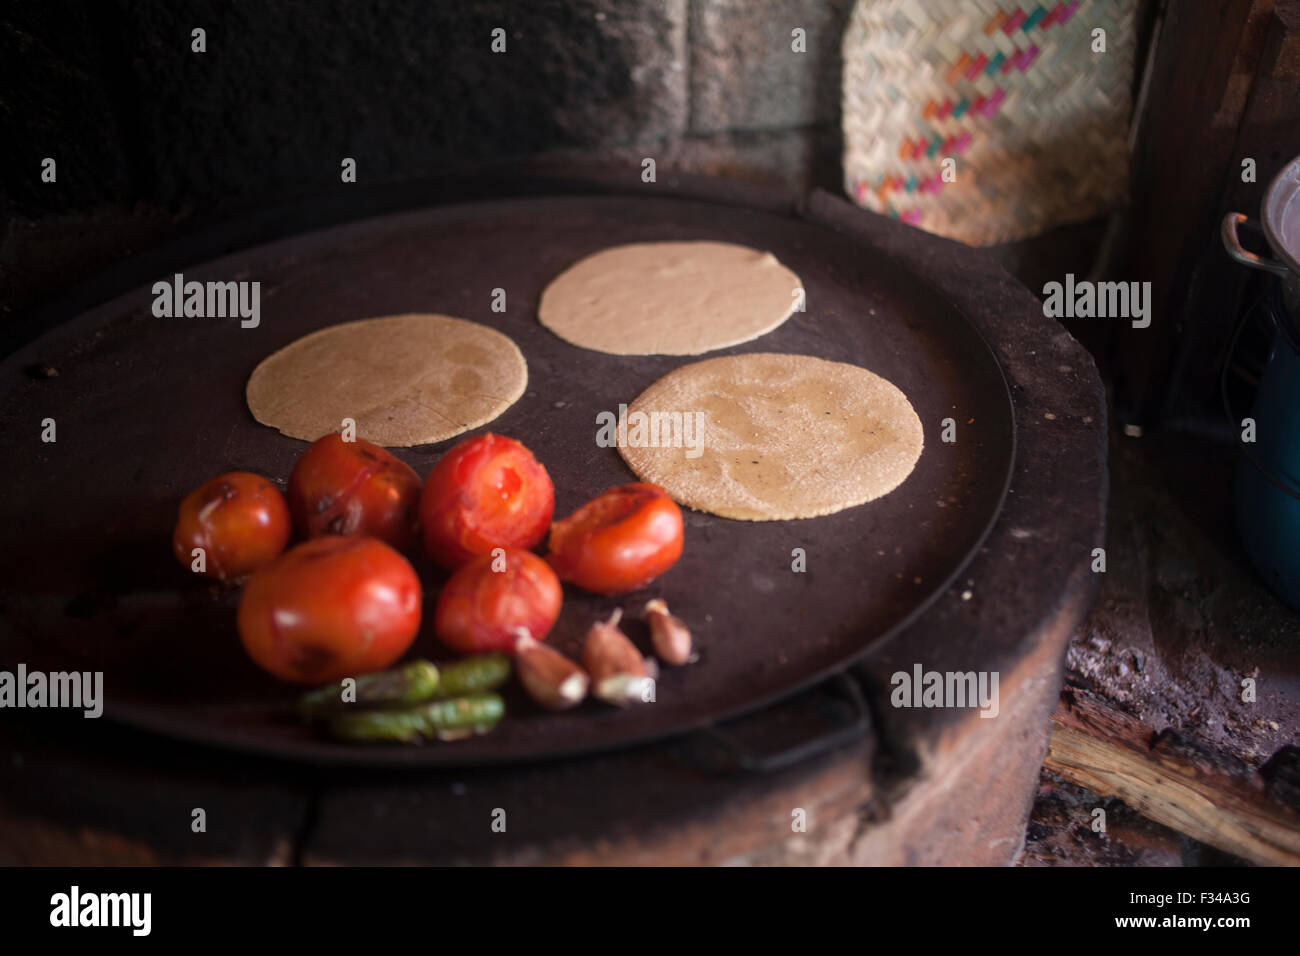 Corn tortillas, tomatoes and green chillies grilled in 'Tepetlixpa Seed Bank', created by Tomas Villanueva Buendia 'Tomaicito' to protect and rescue the original varieties of Mexican corn Stock Photo